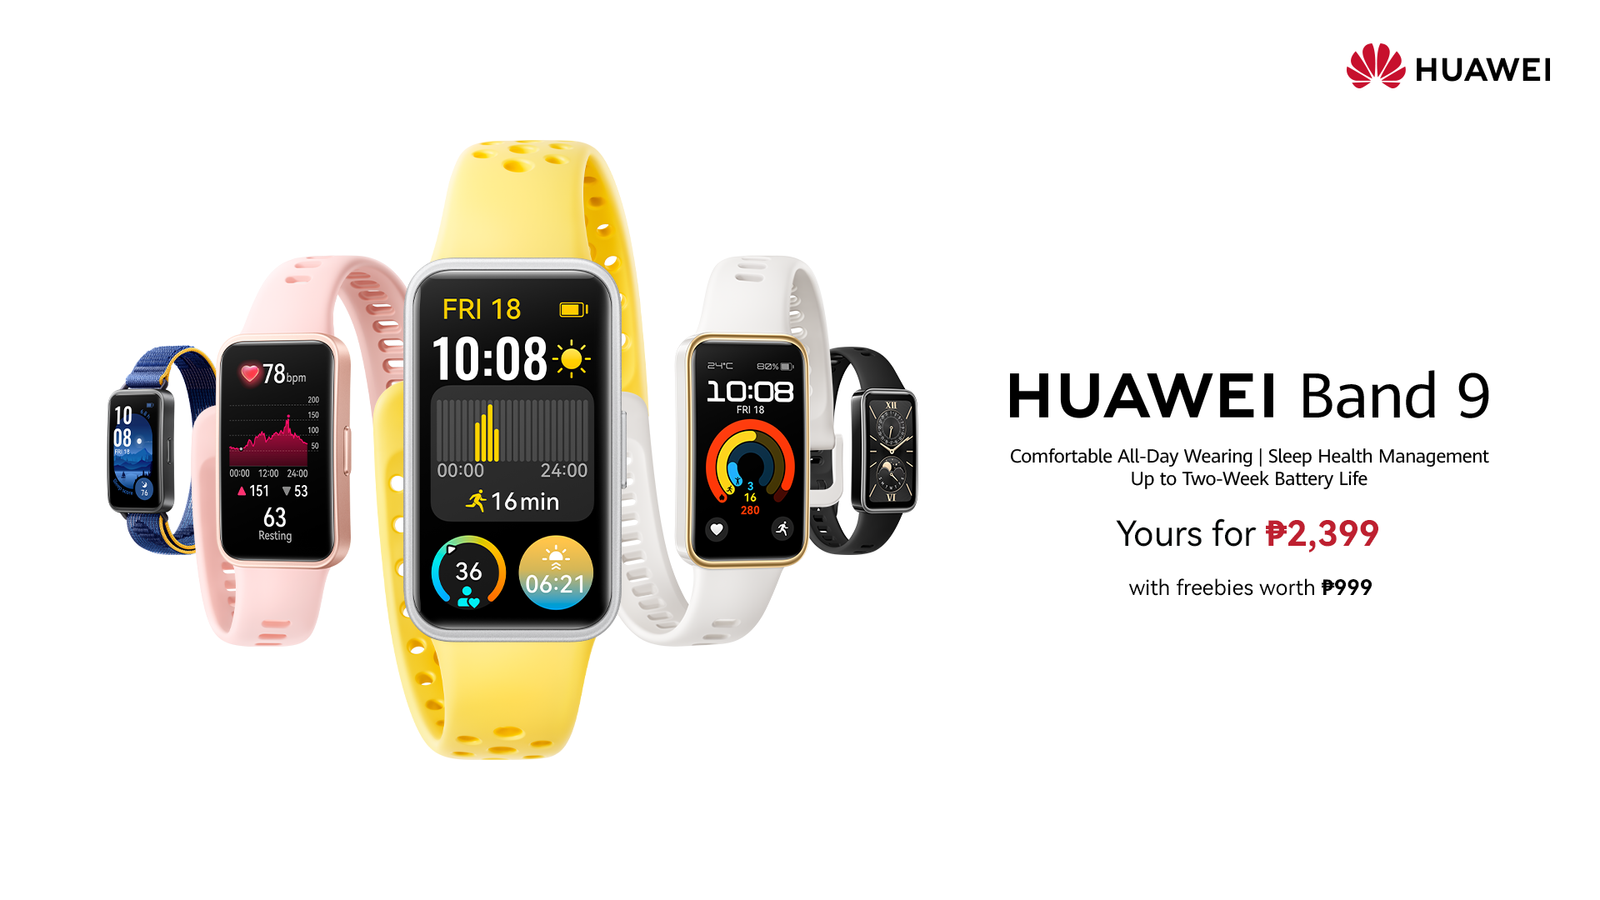 Huawei Band 9: Reshaping All-Day Comfort in Smart Watch Wearables